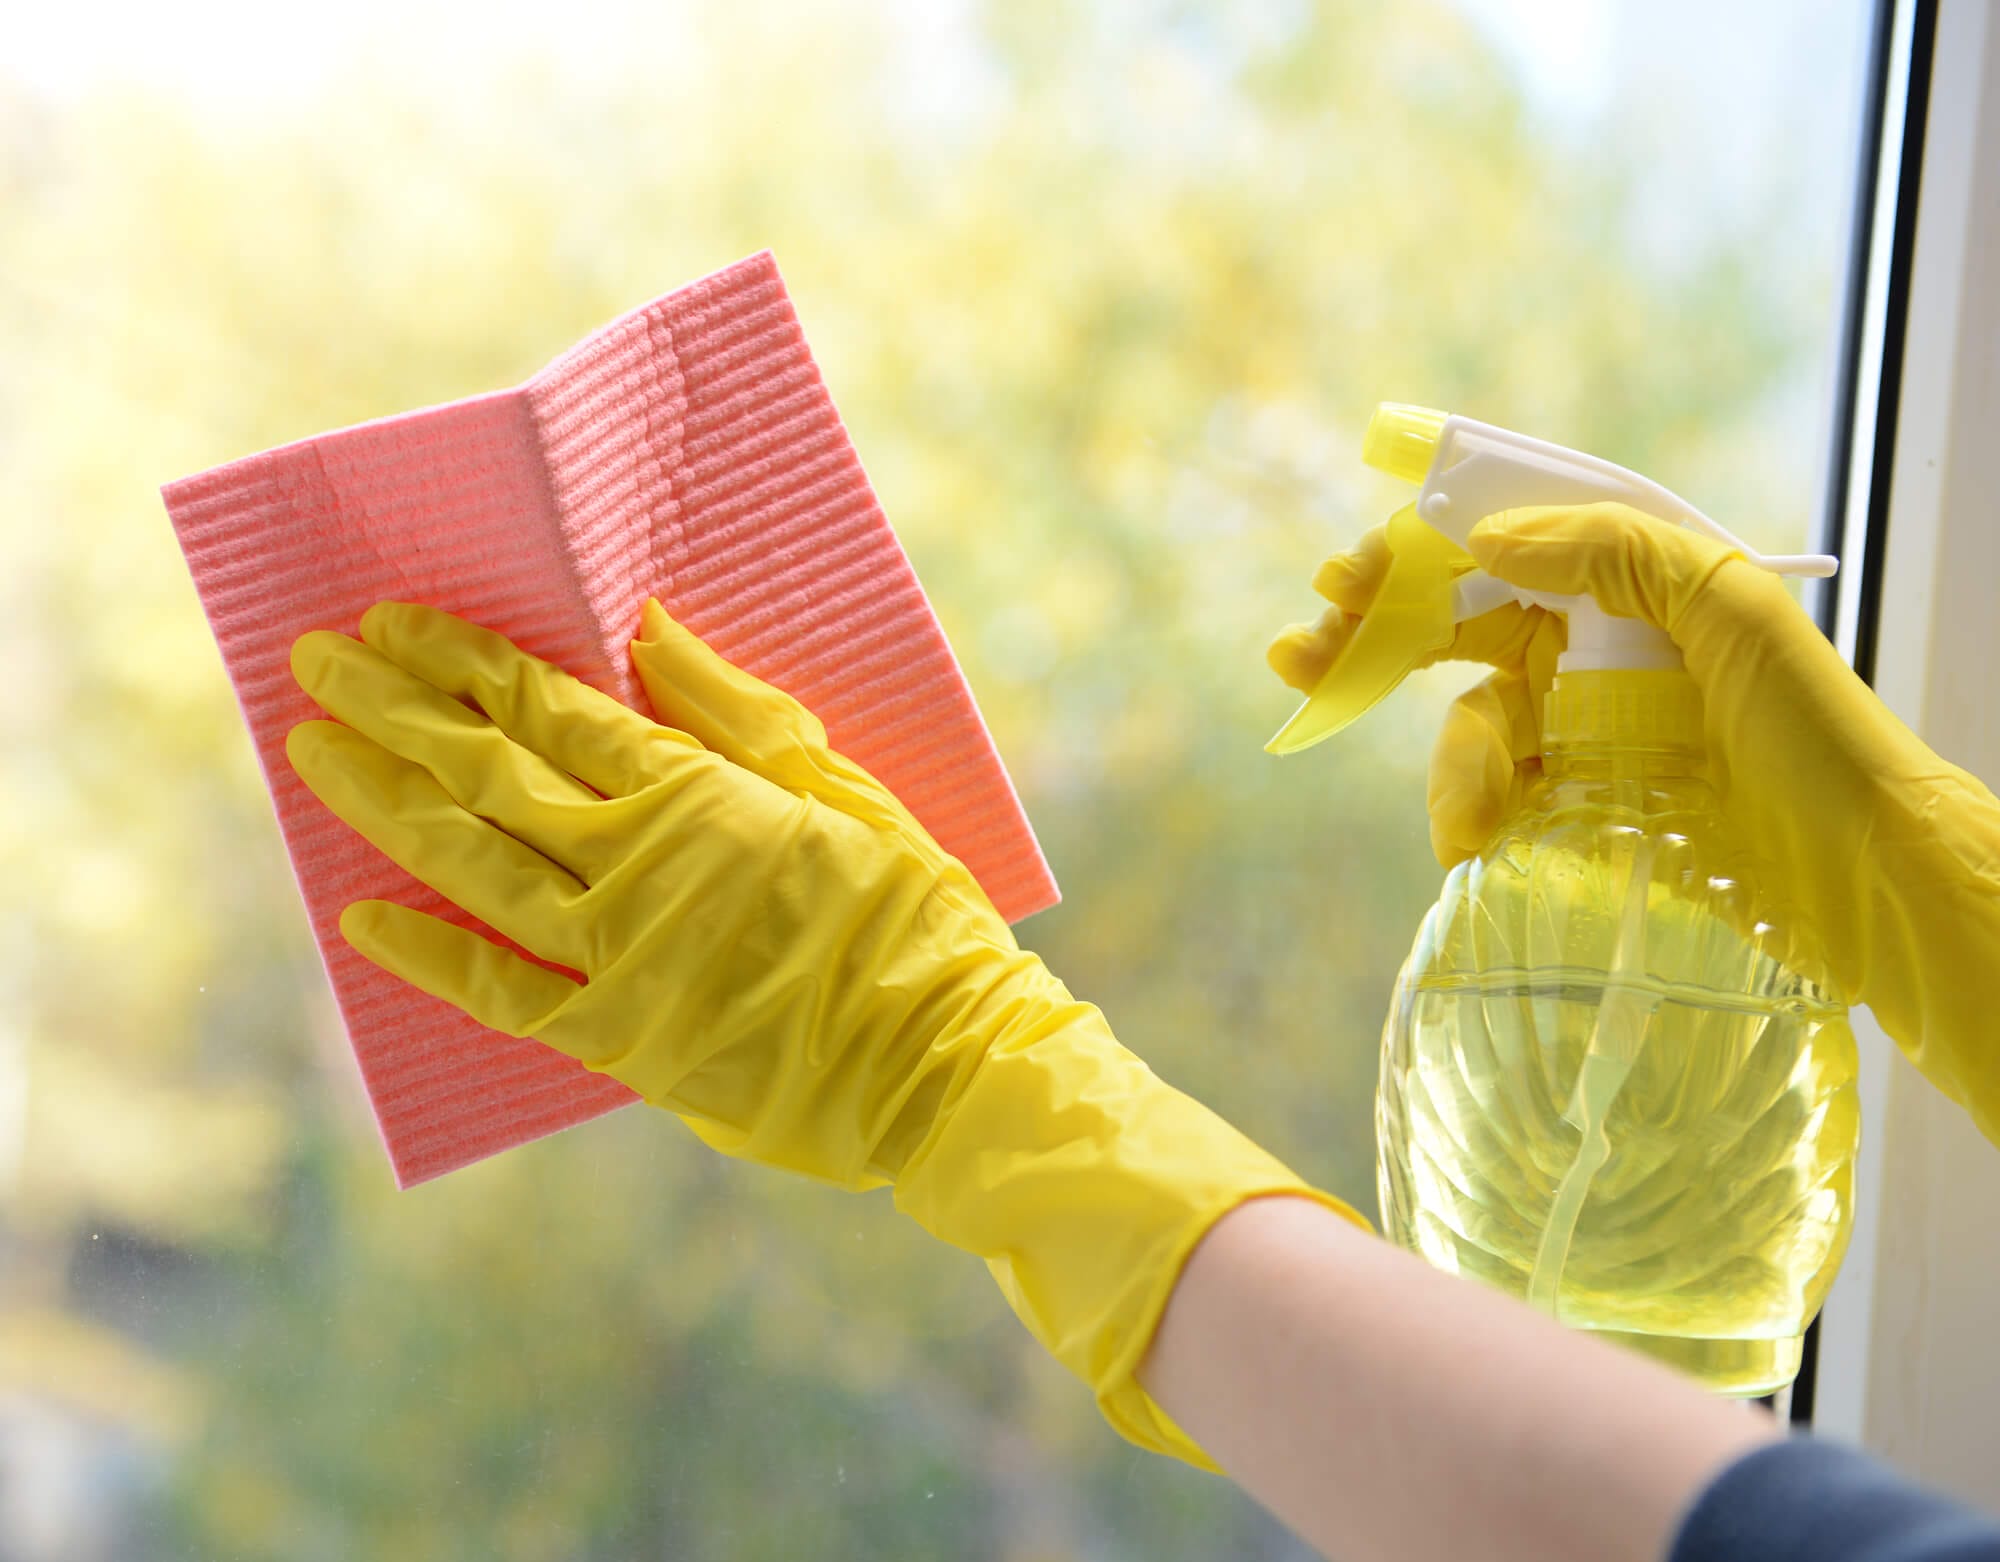 A person spraying the window glass and wiping it with a pink rag and yellow gloves